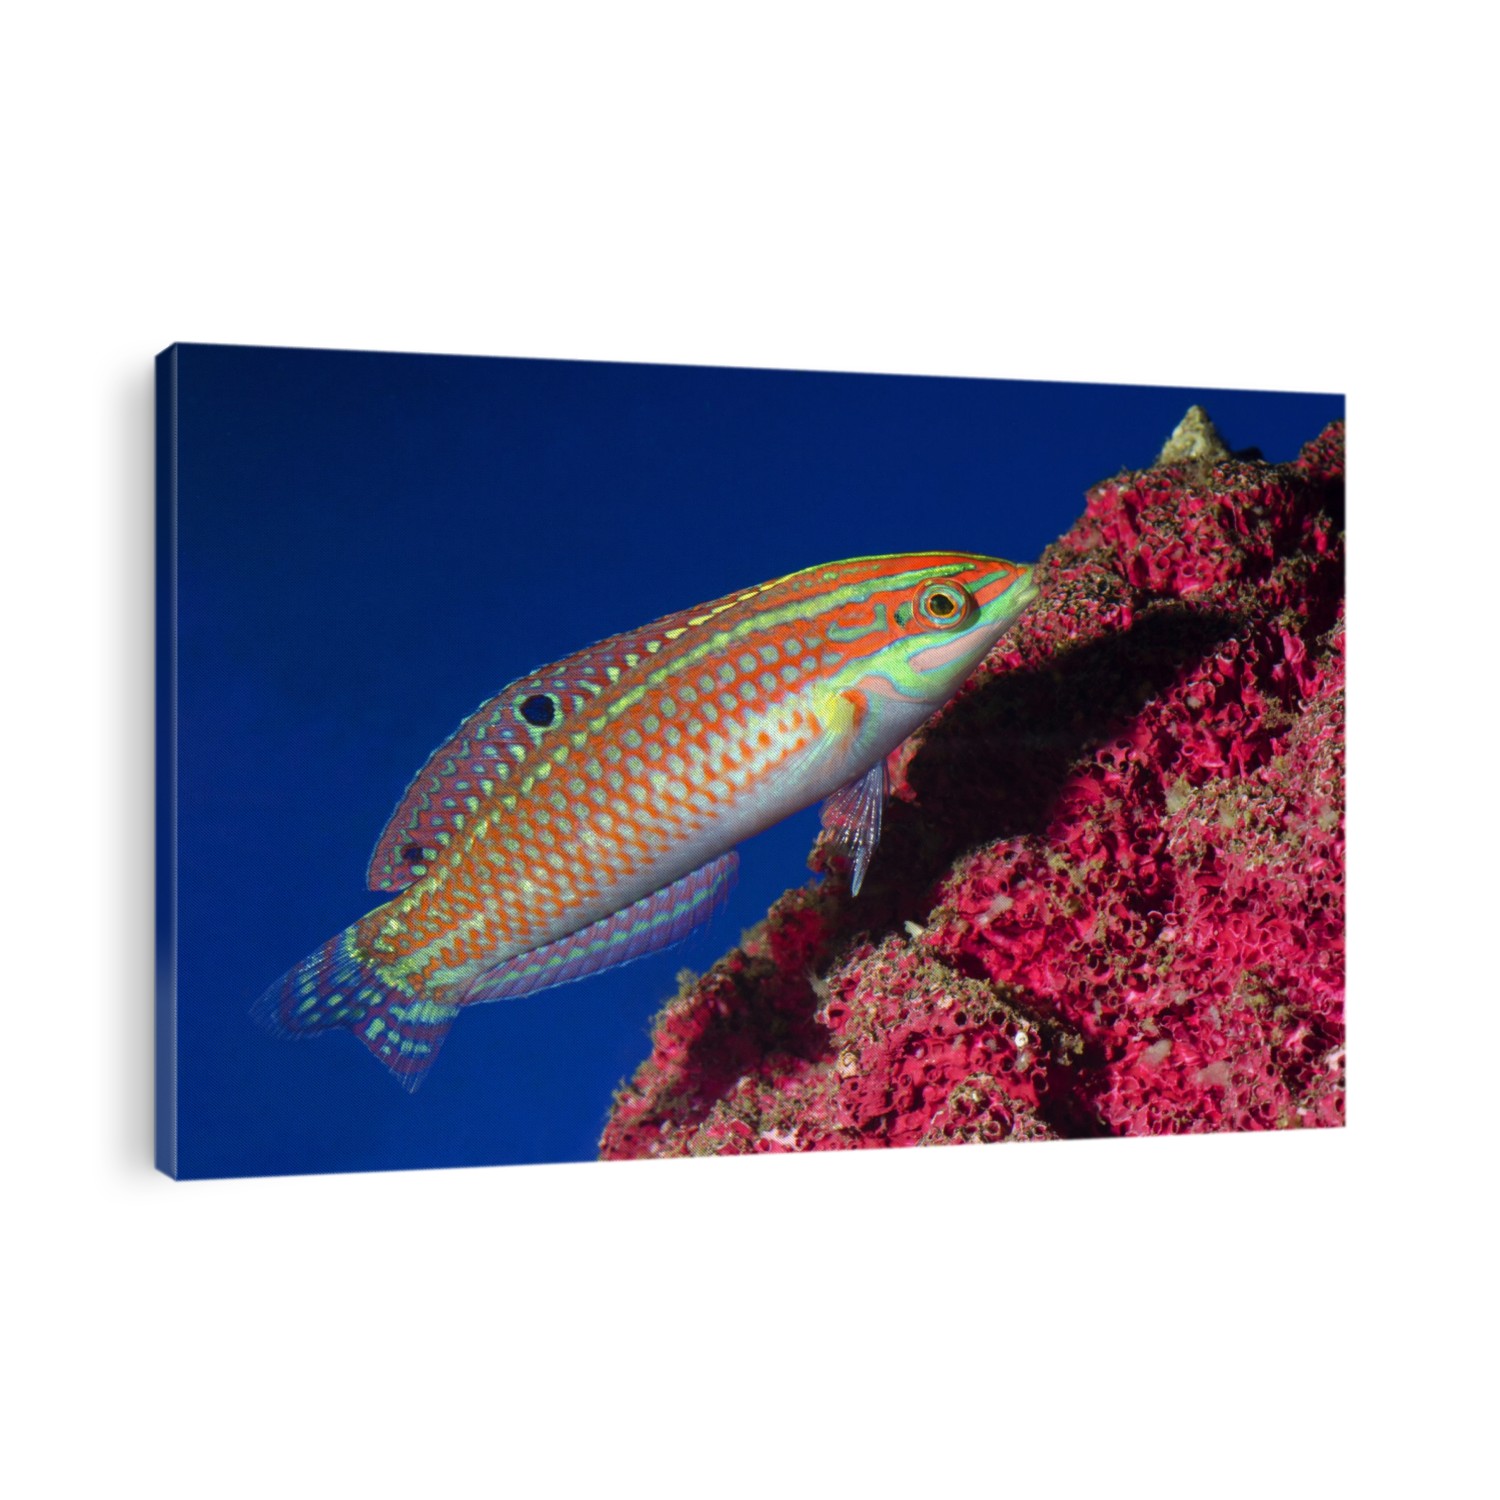 Adorned wrasse (Halichoeres cometus). This tropical marine fish is native to the Gulf of Thailand.